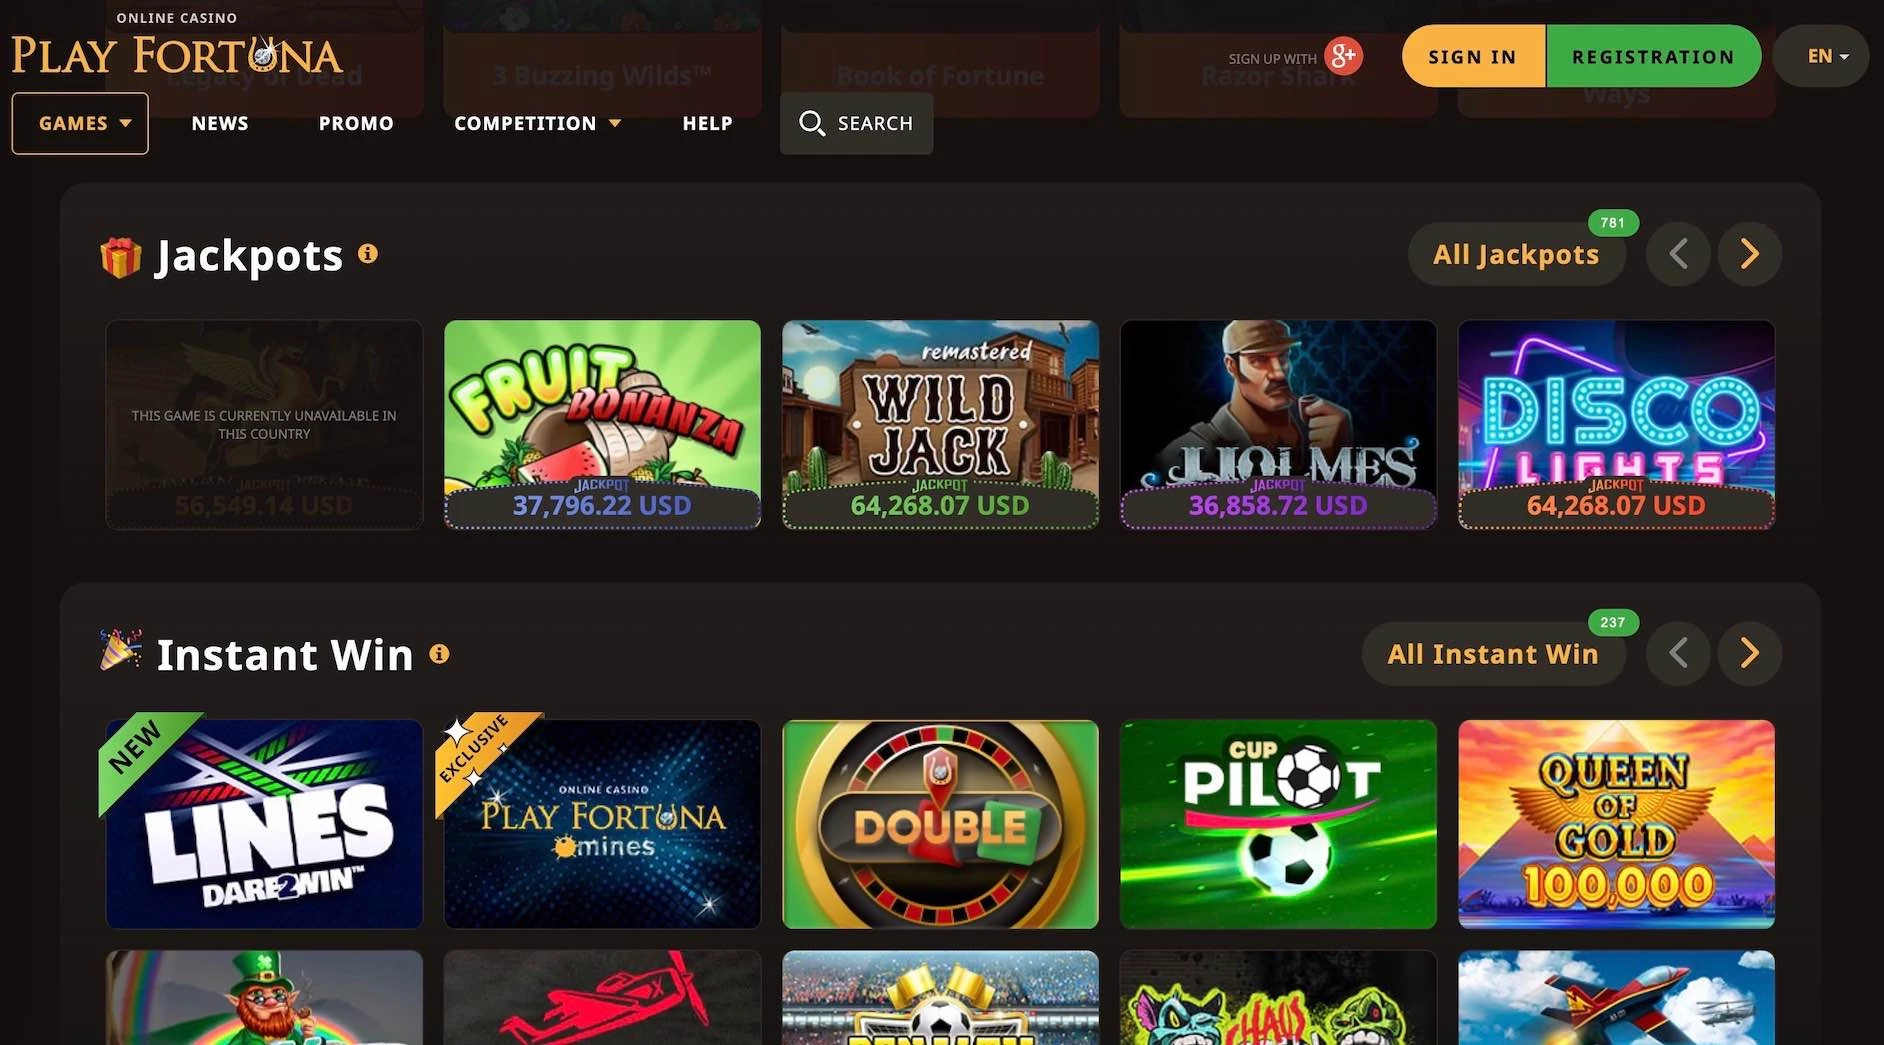 Play Fortuna Casino Review Jackpots